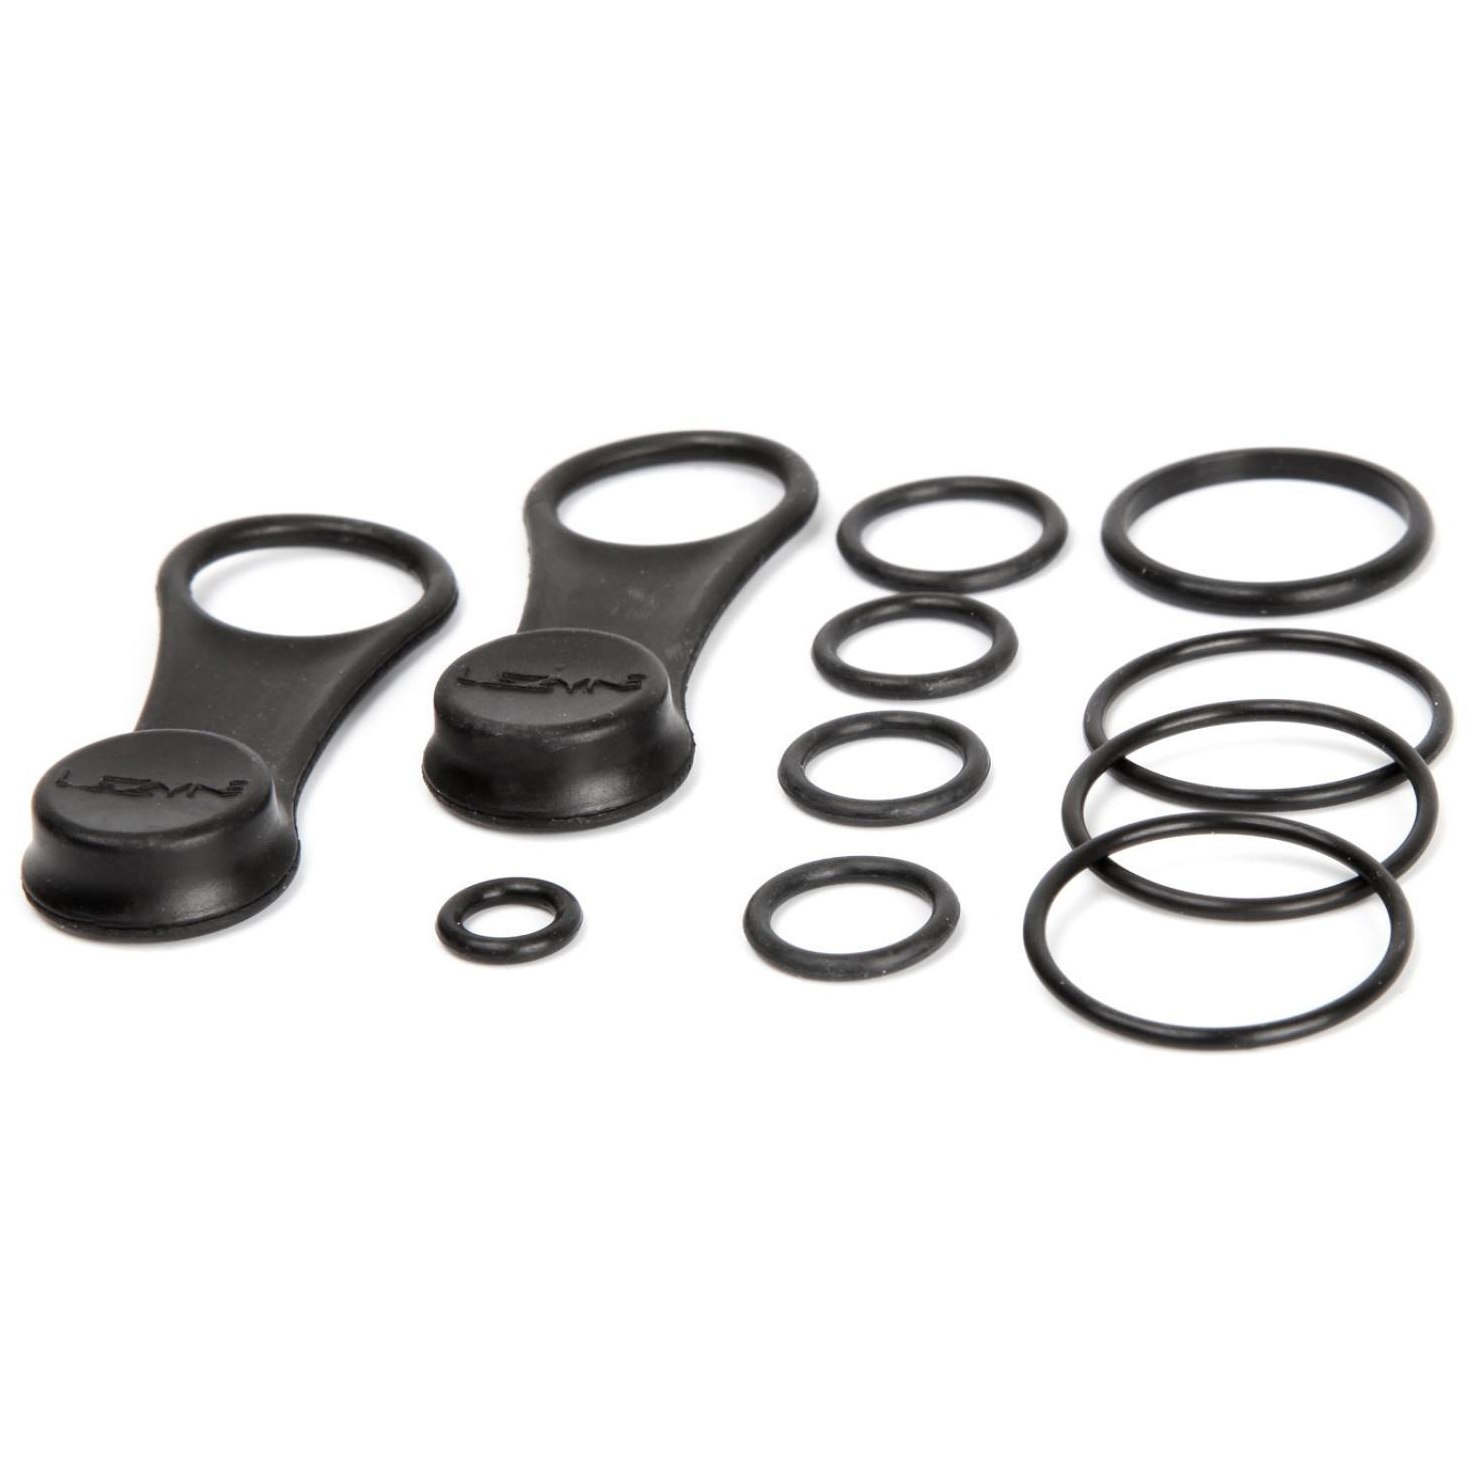 Image of Lezyne Seal Kit for Road Drive Pump